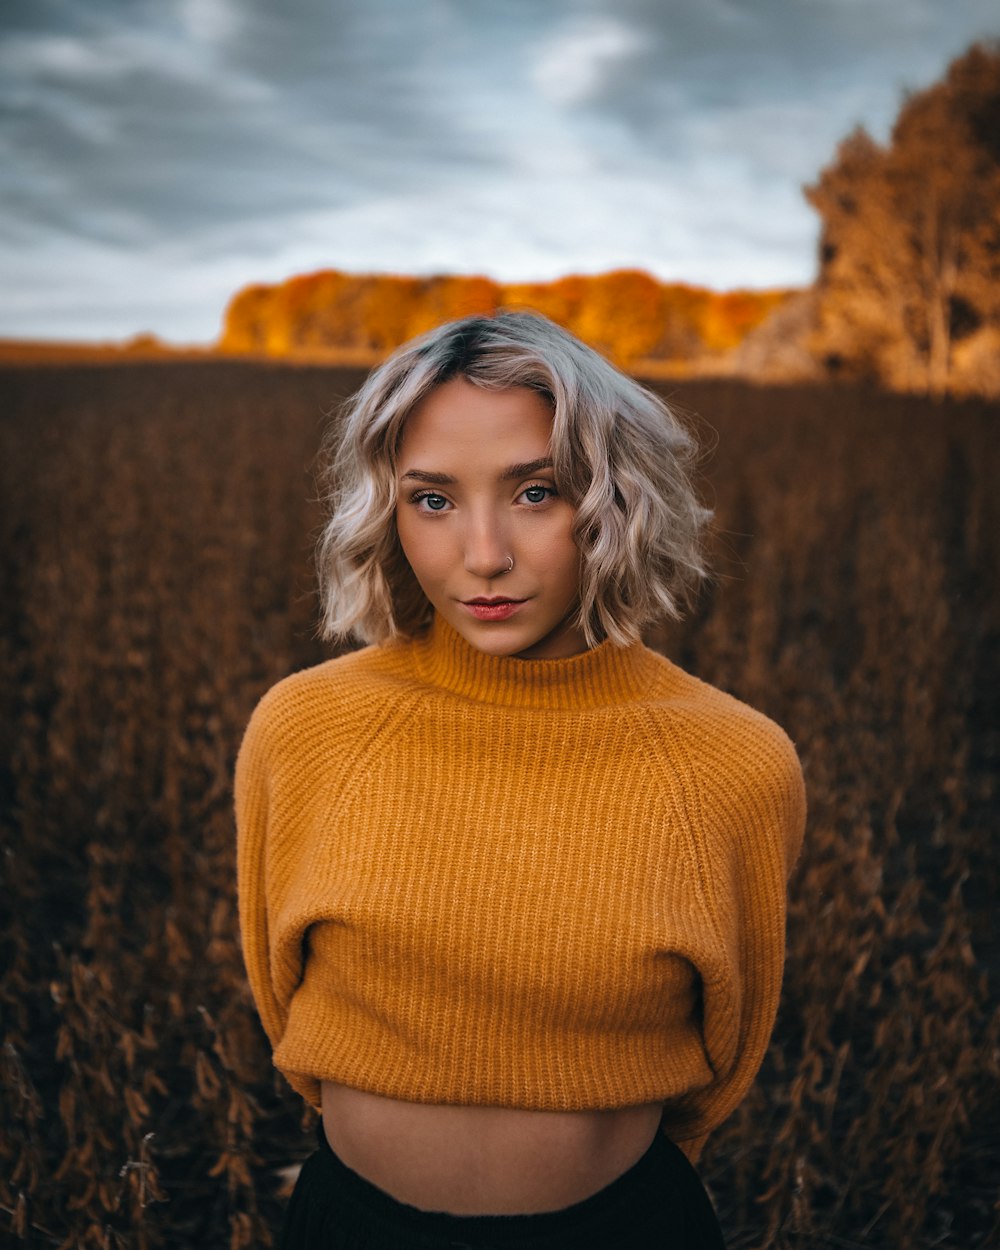 woman in brown turtleneck sweater standing on brown grass field during daytime